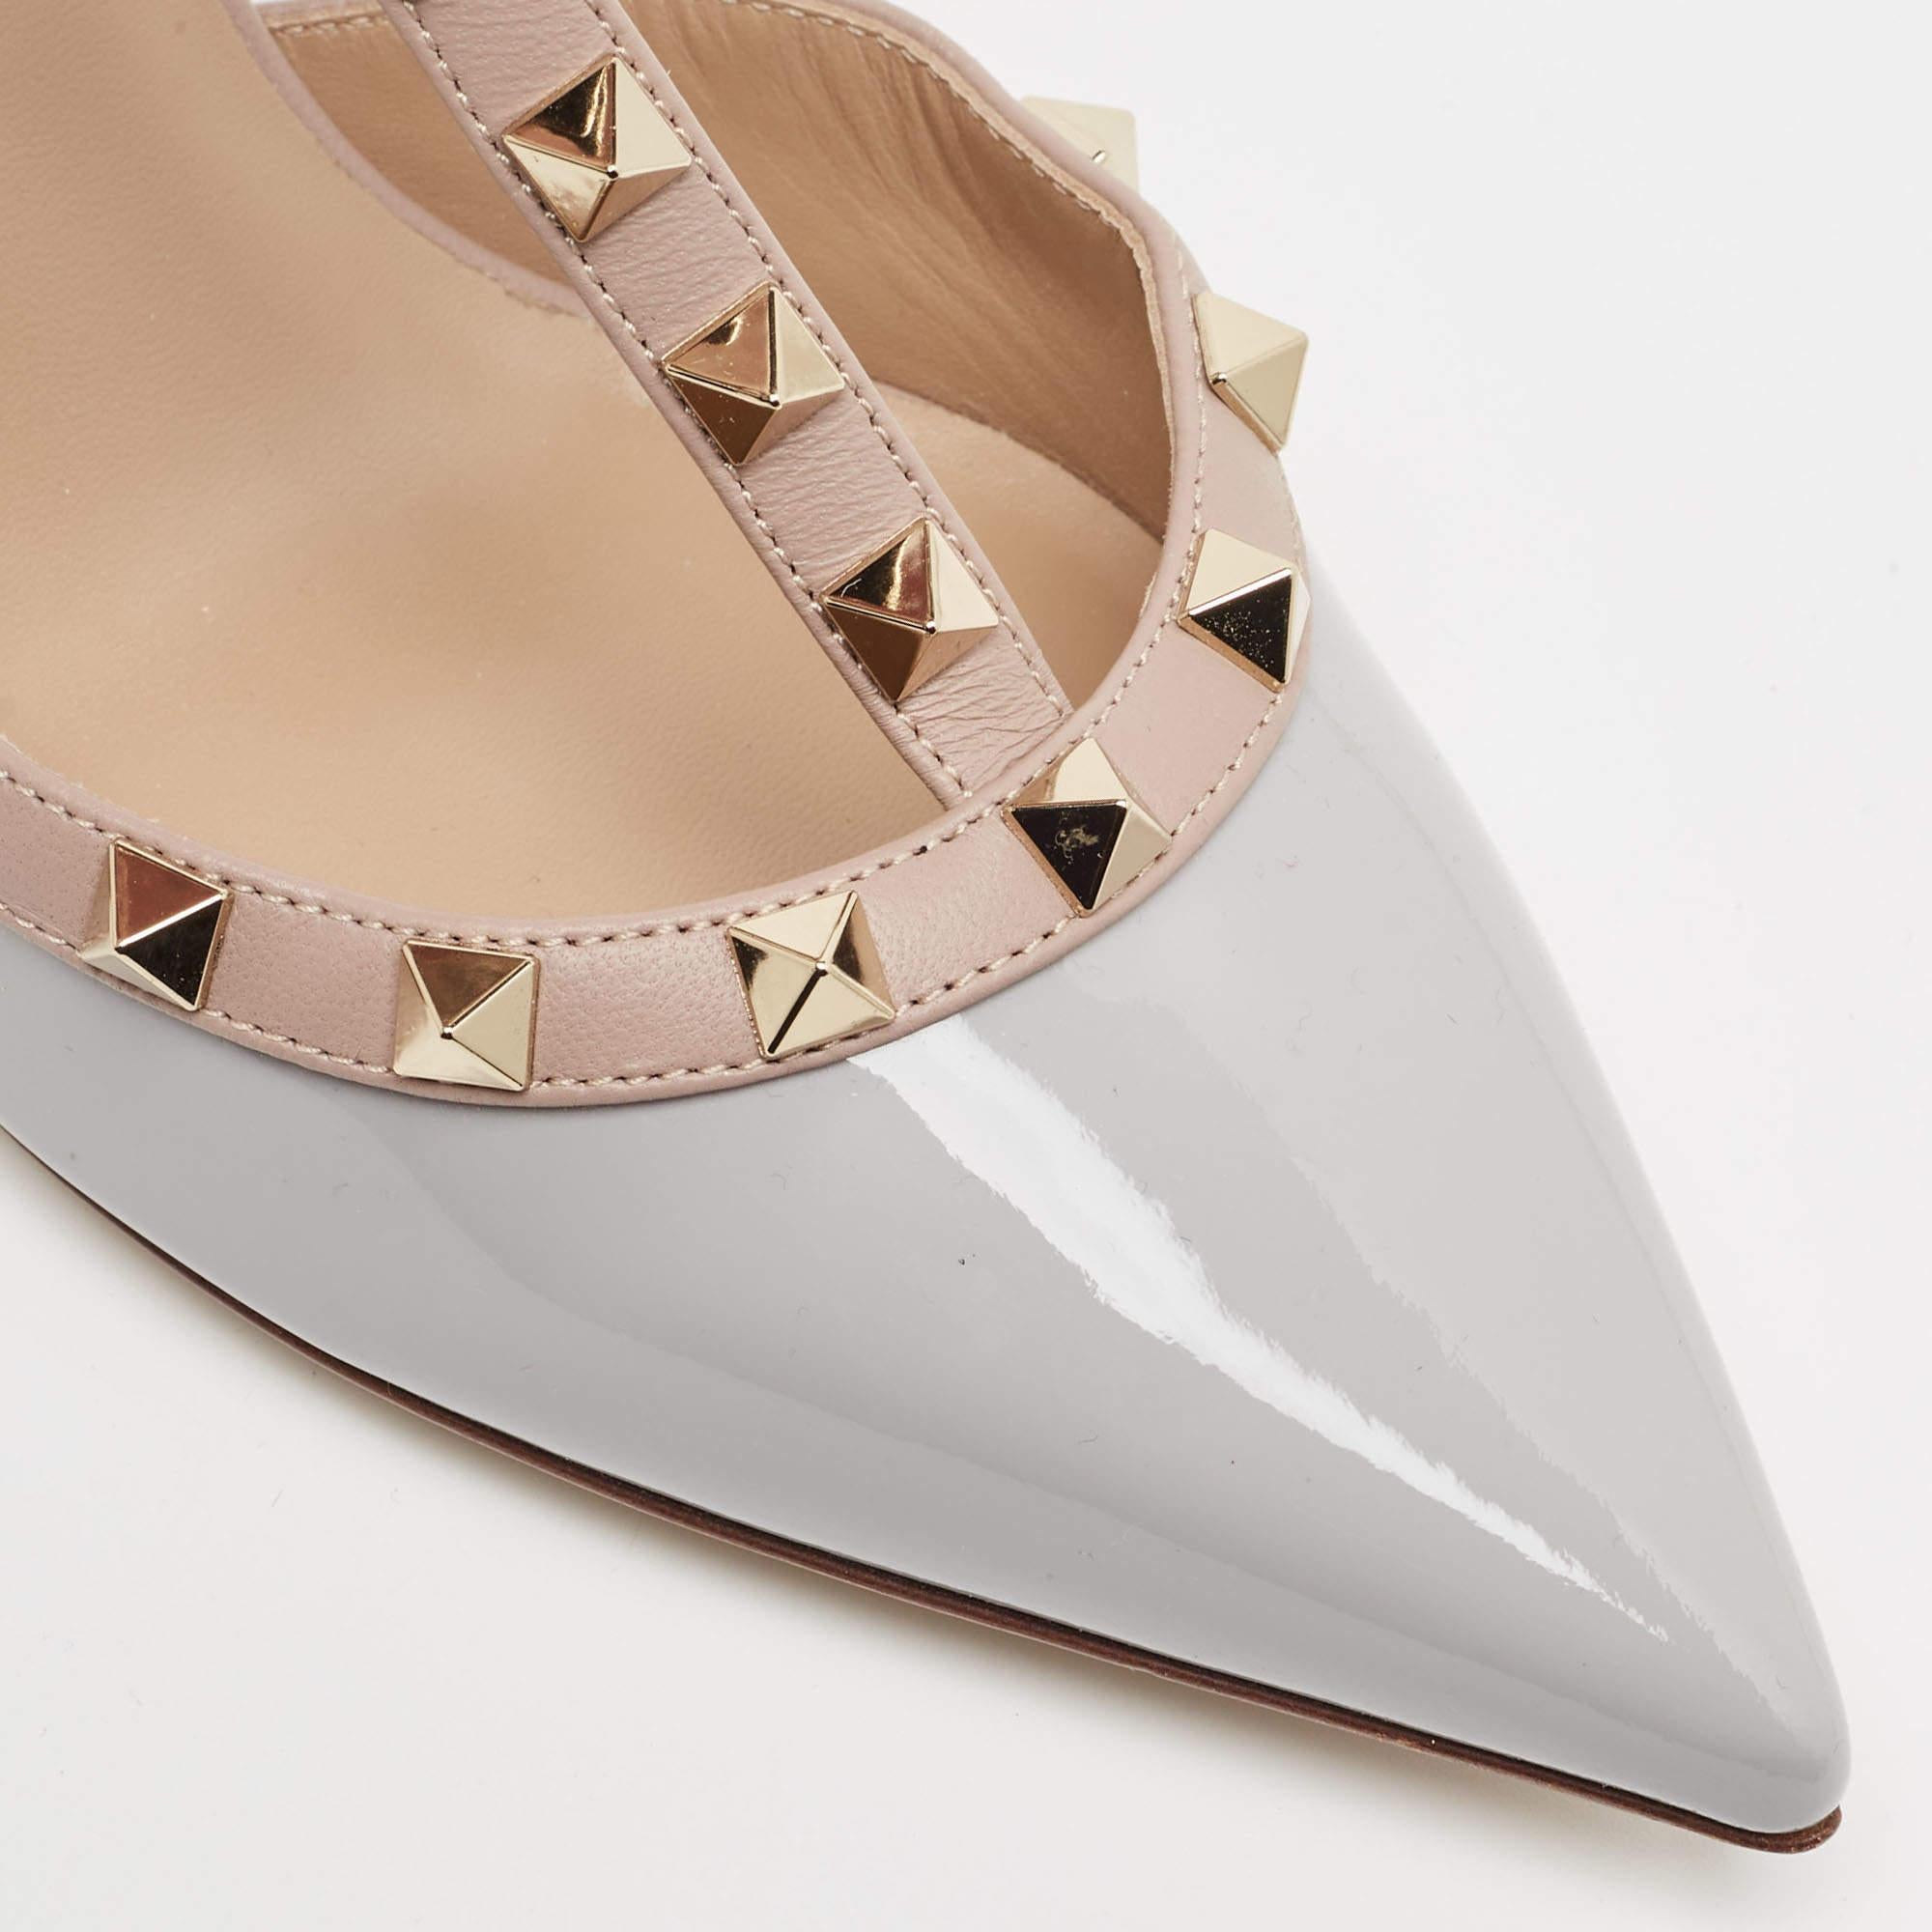 Complement your well-put-together outfit with these authentic Valentino Rockstud shoes. Timeless and classy, they have an amazing construction for enduring quality and comfortable fit.

Includes: Original Dustbag, Original Box, Extra Heel Tips, Info